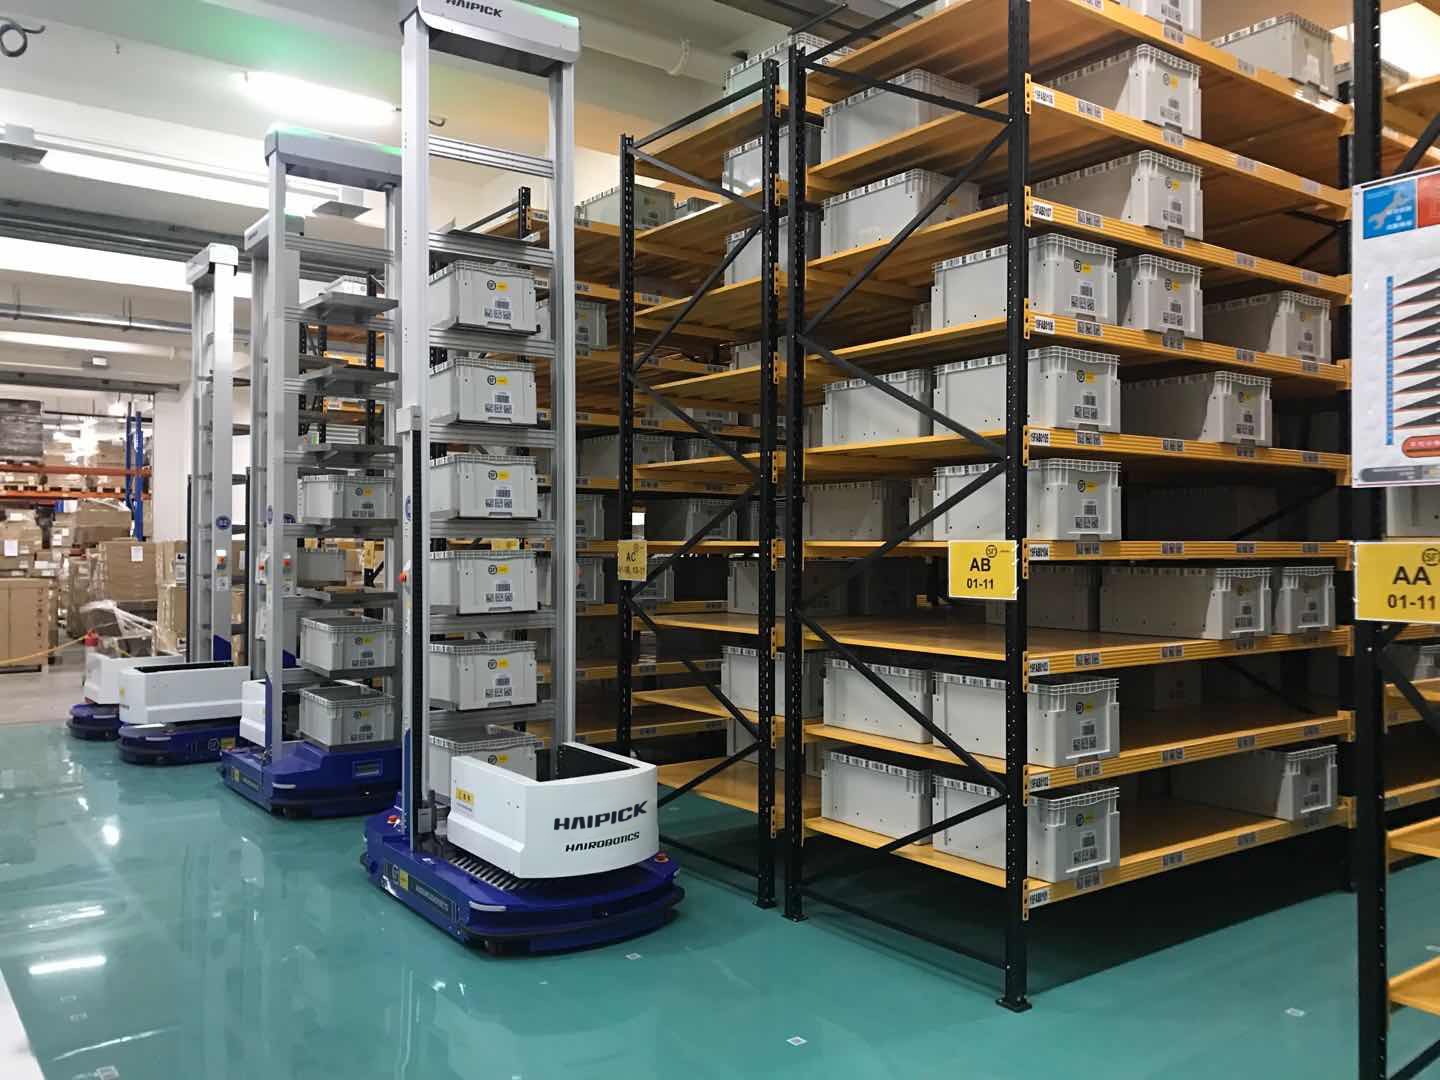  HAIPICK A42 Operating in a 3PL Warehouse in Hong Kong